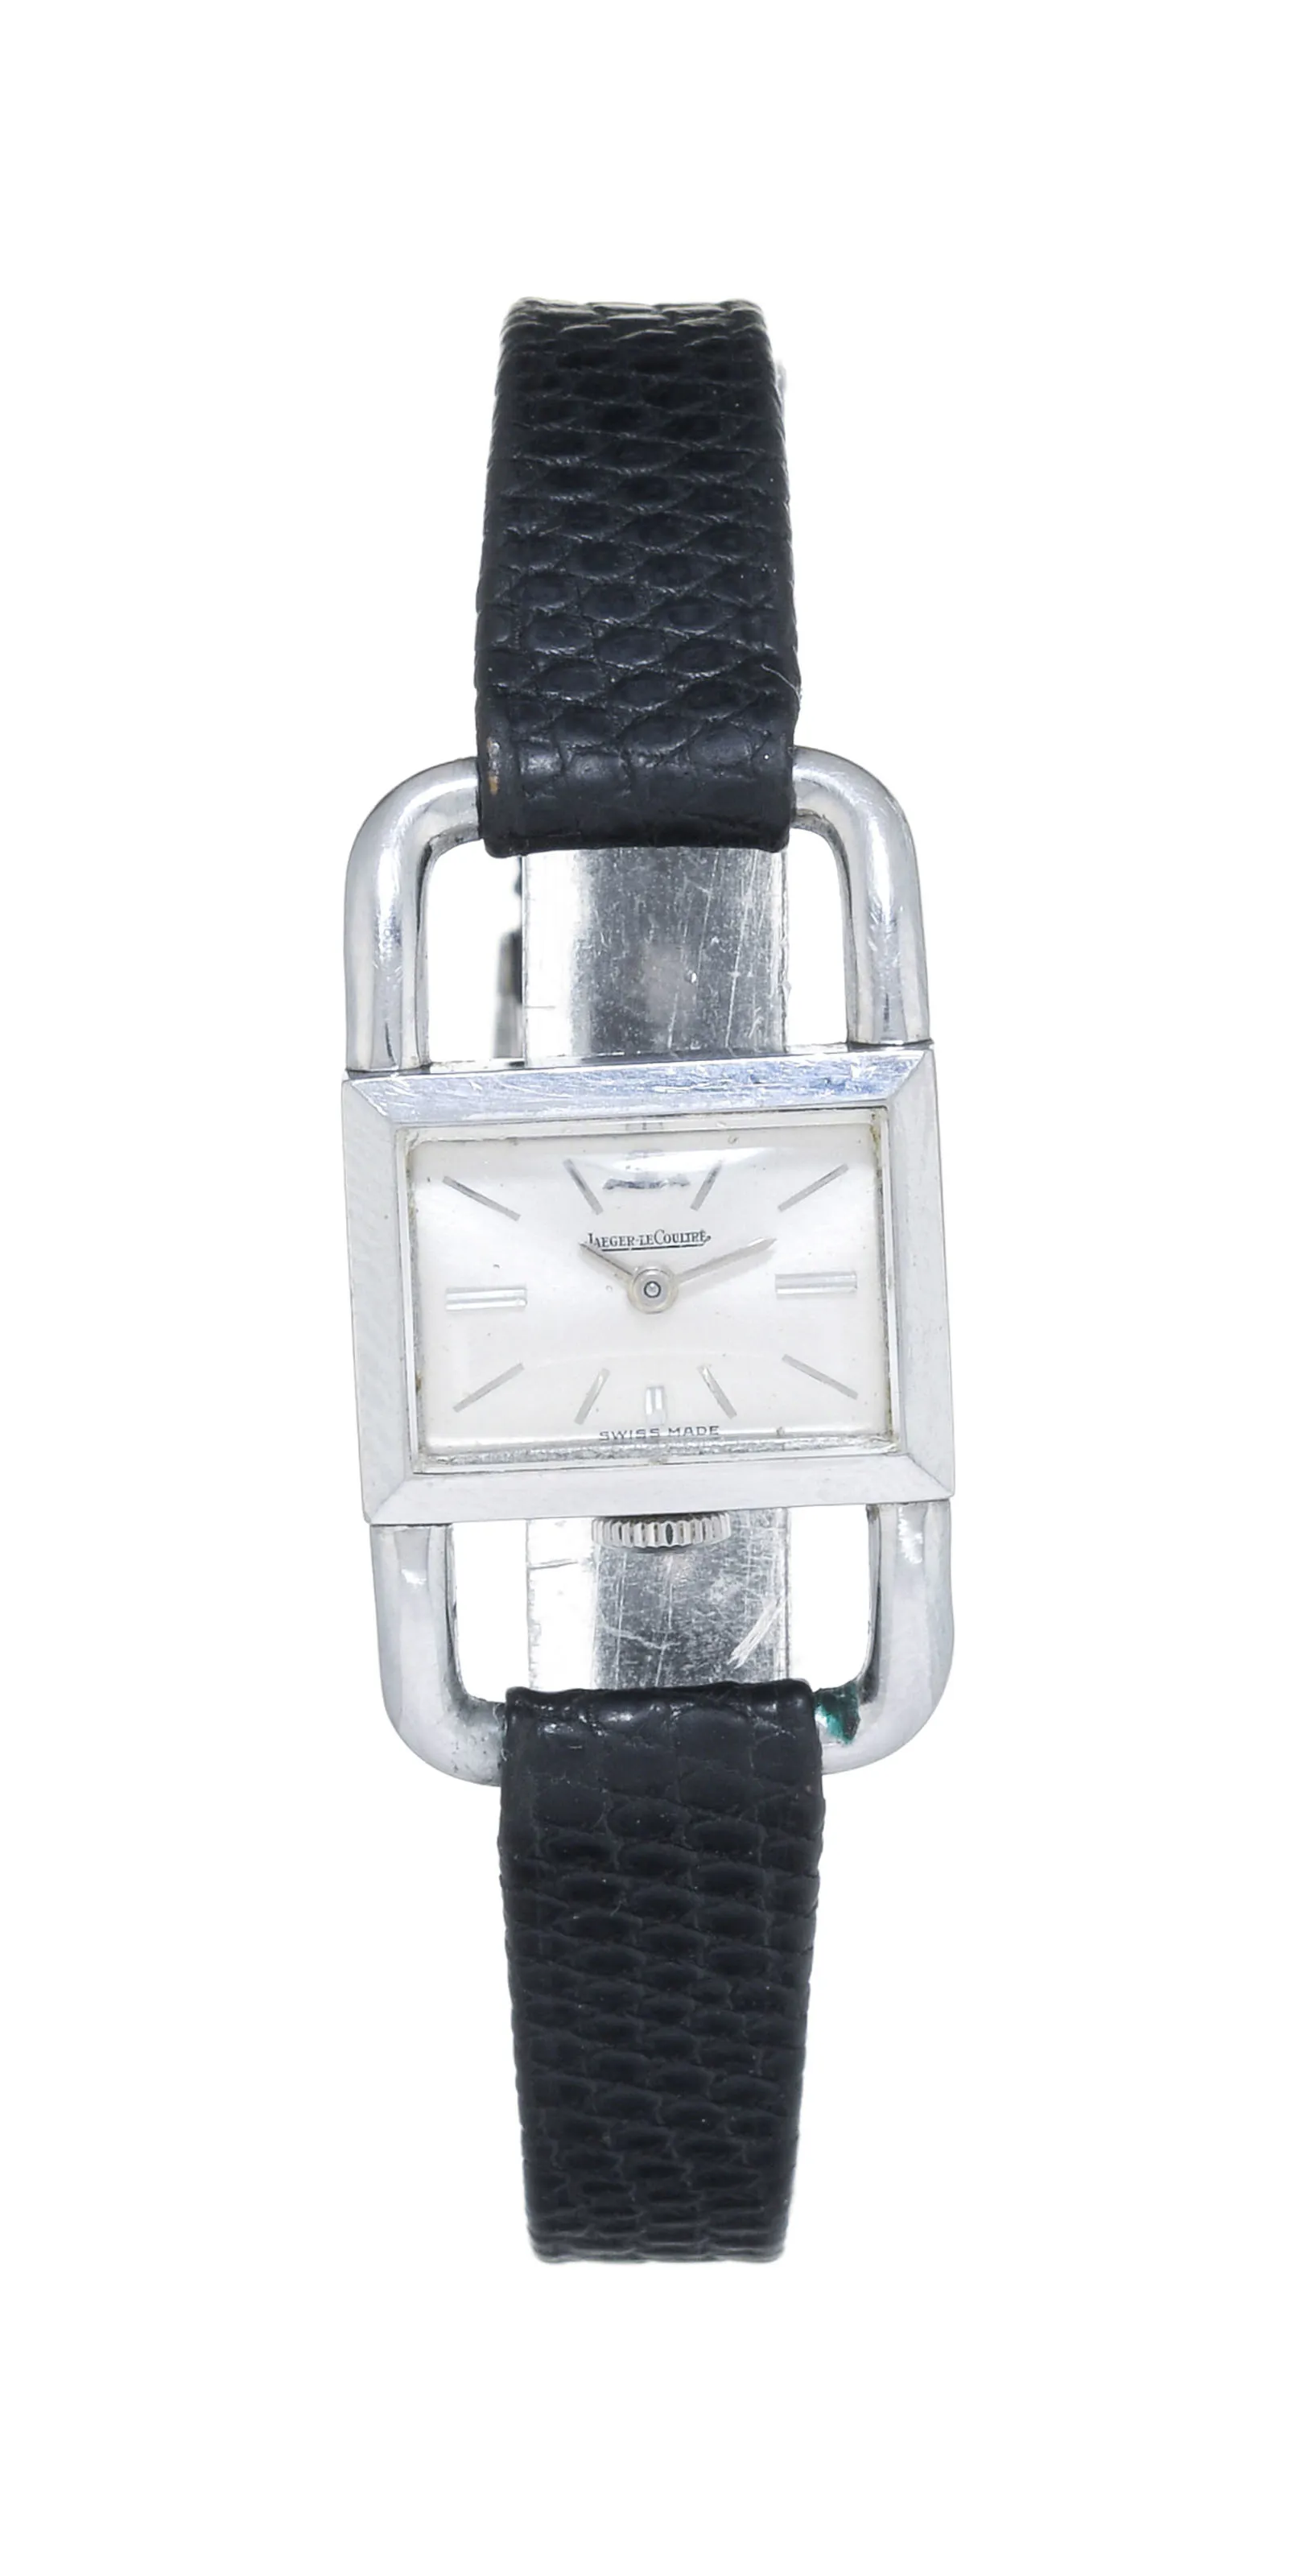 Jaeger-LeCoultre 1670 20mm Stainless steel Silver